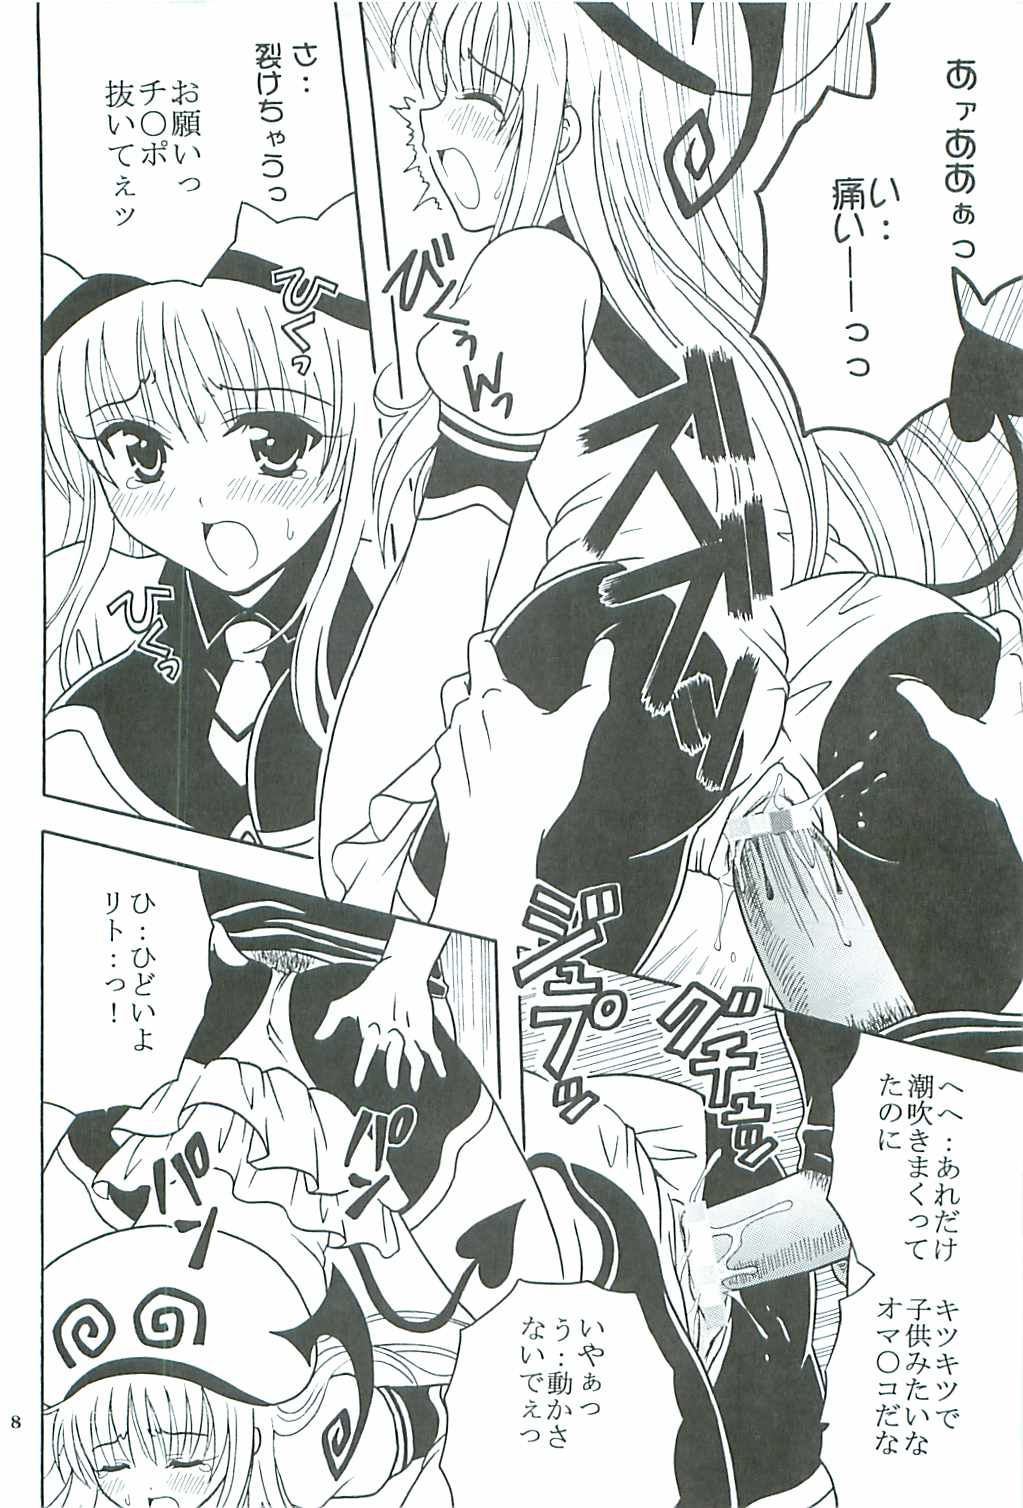 [St.Rio] ToLOVE Ryu 2 (To Love Ru) page 9 full